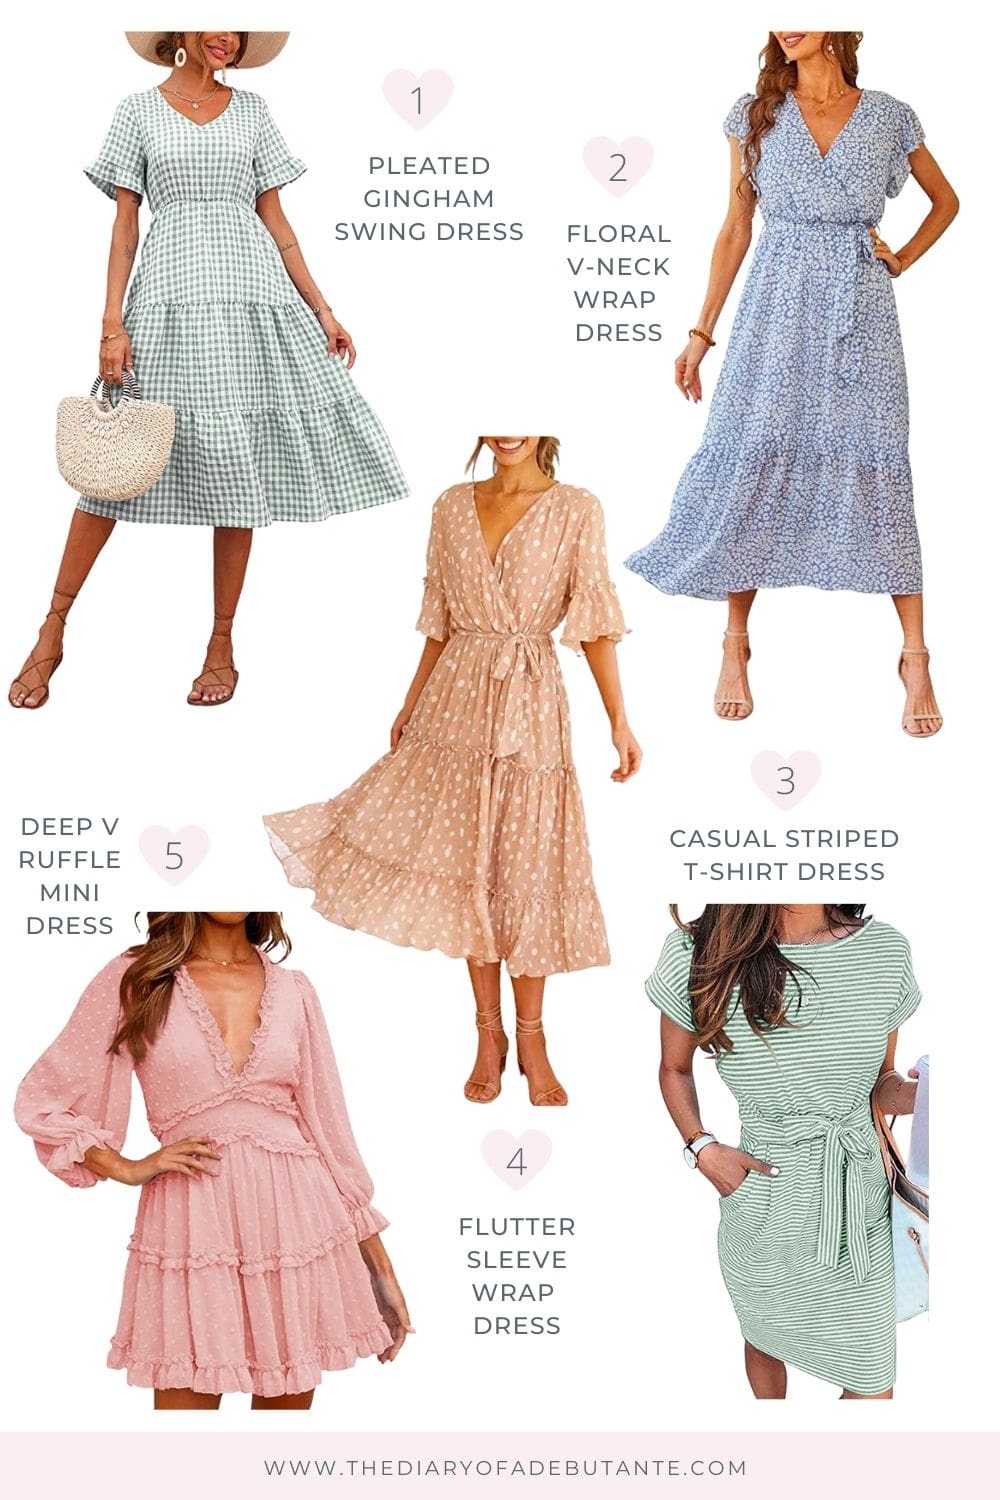 Favorite Amazon spring dresses under 50 rounded up by affordable fashion blogger Stephanie Ziajka on Diary of a Debutante